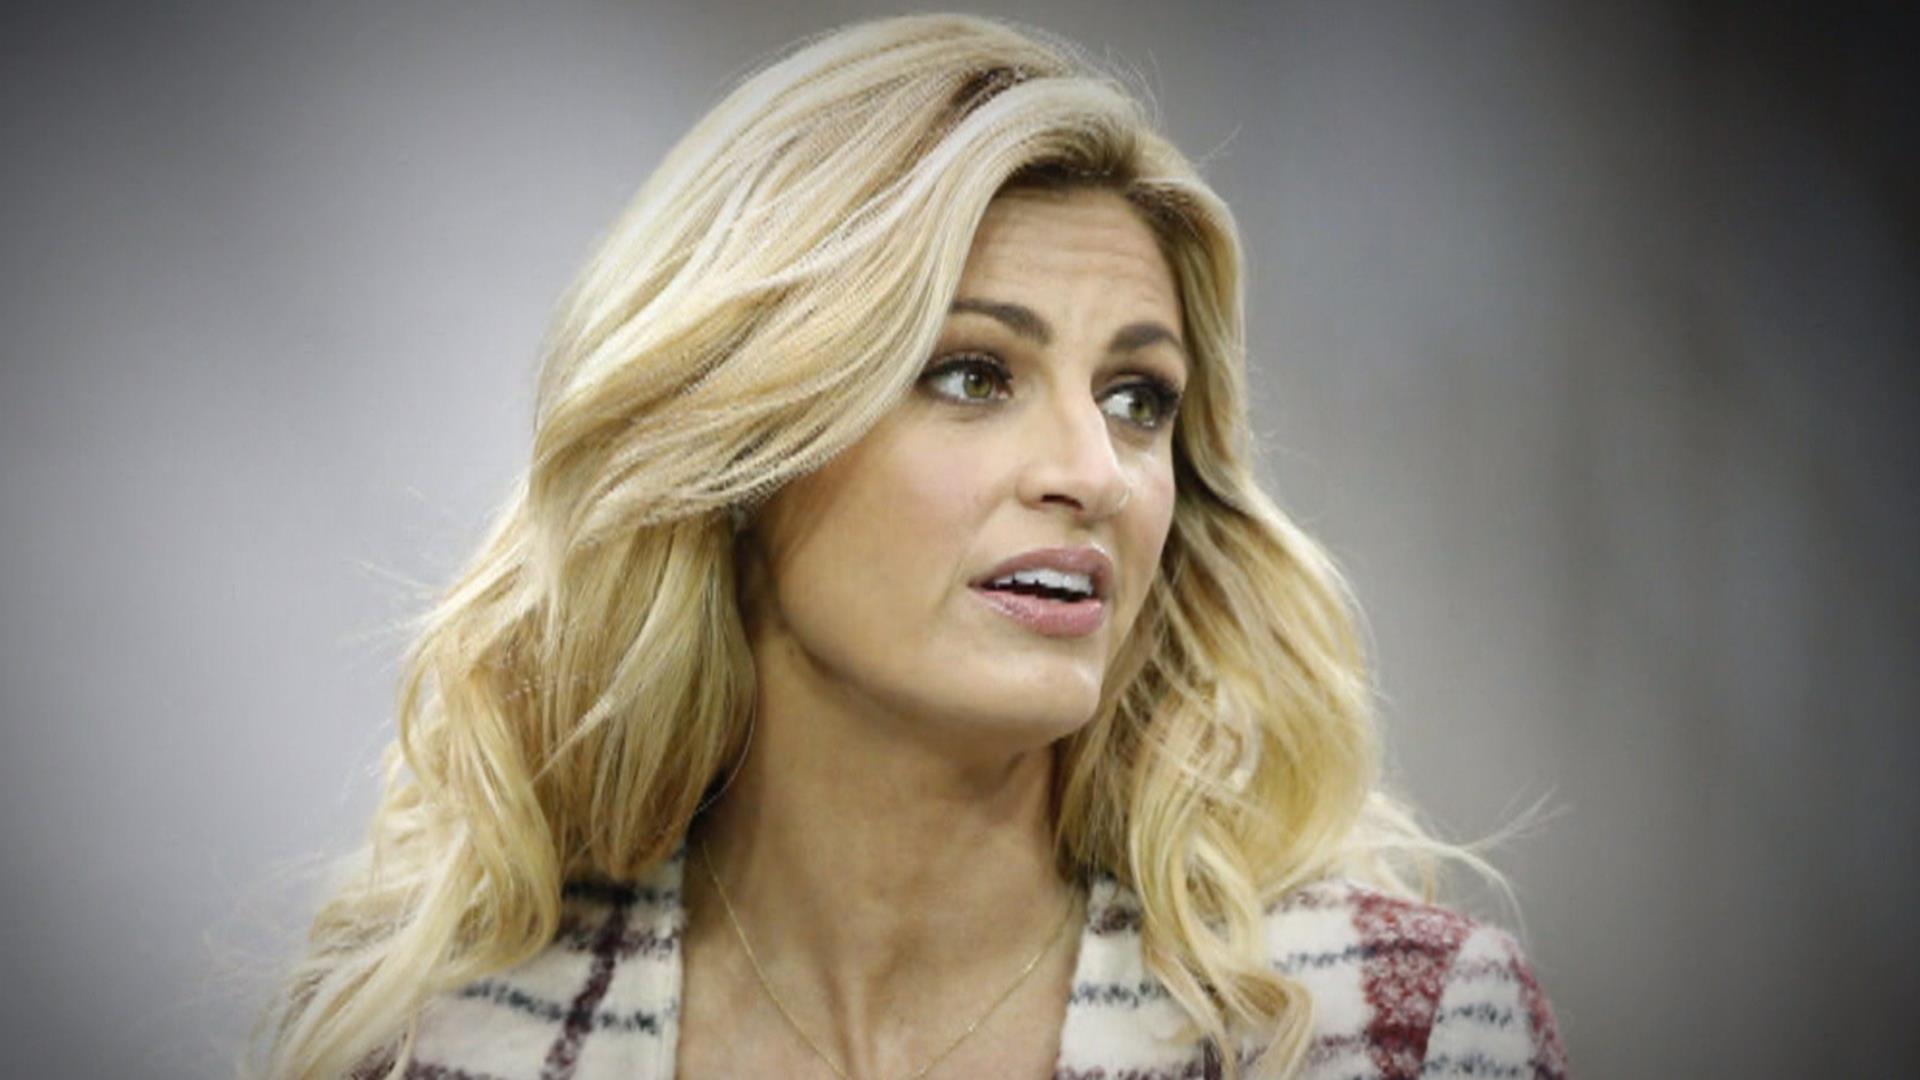 bill fennessy recommends erin andrews porn pic